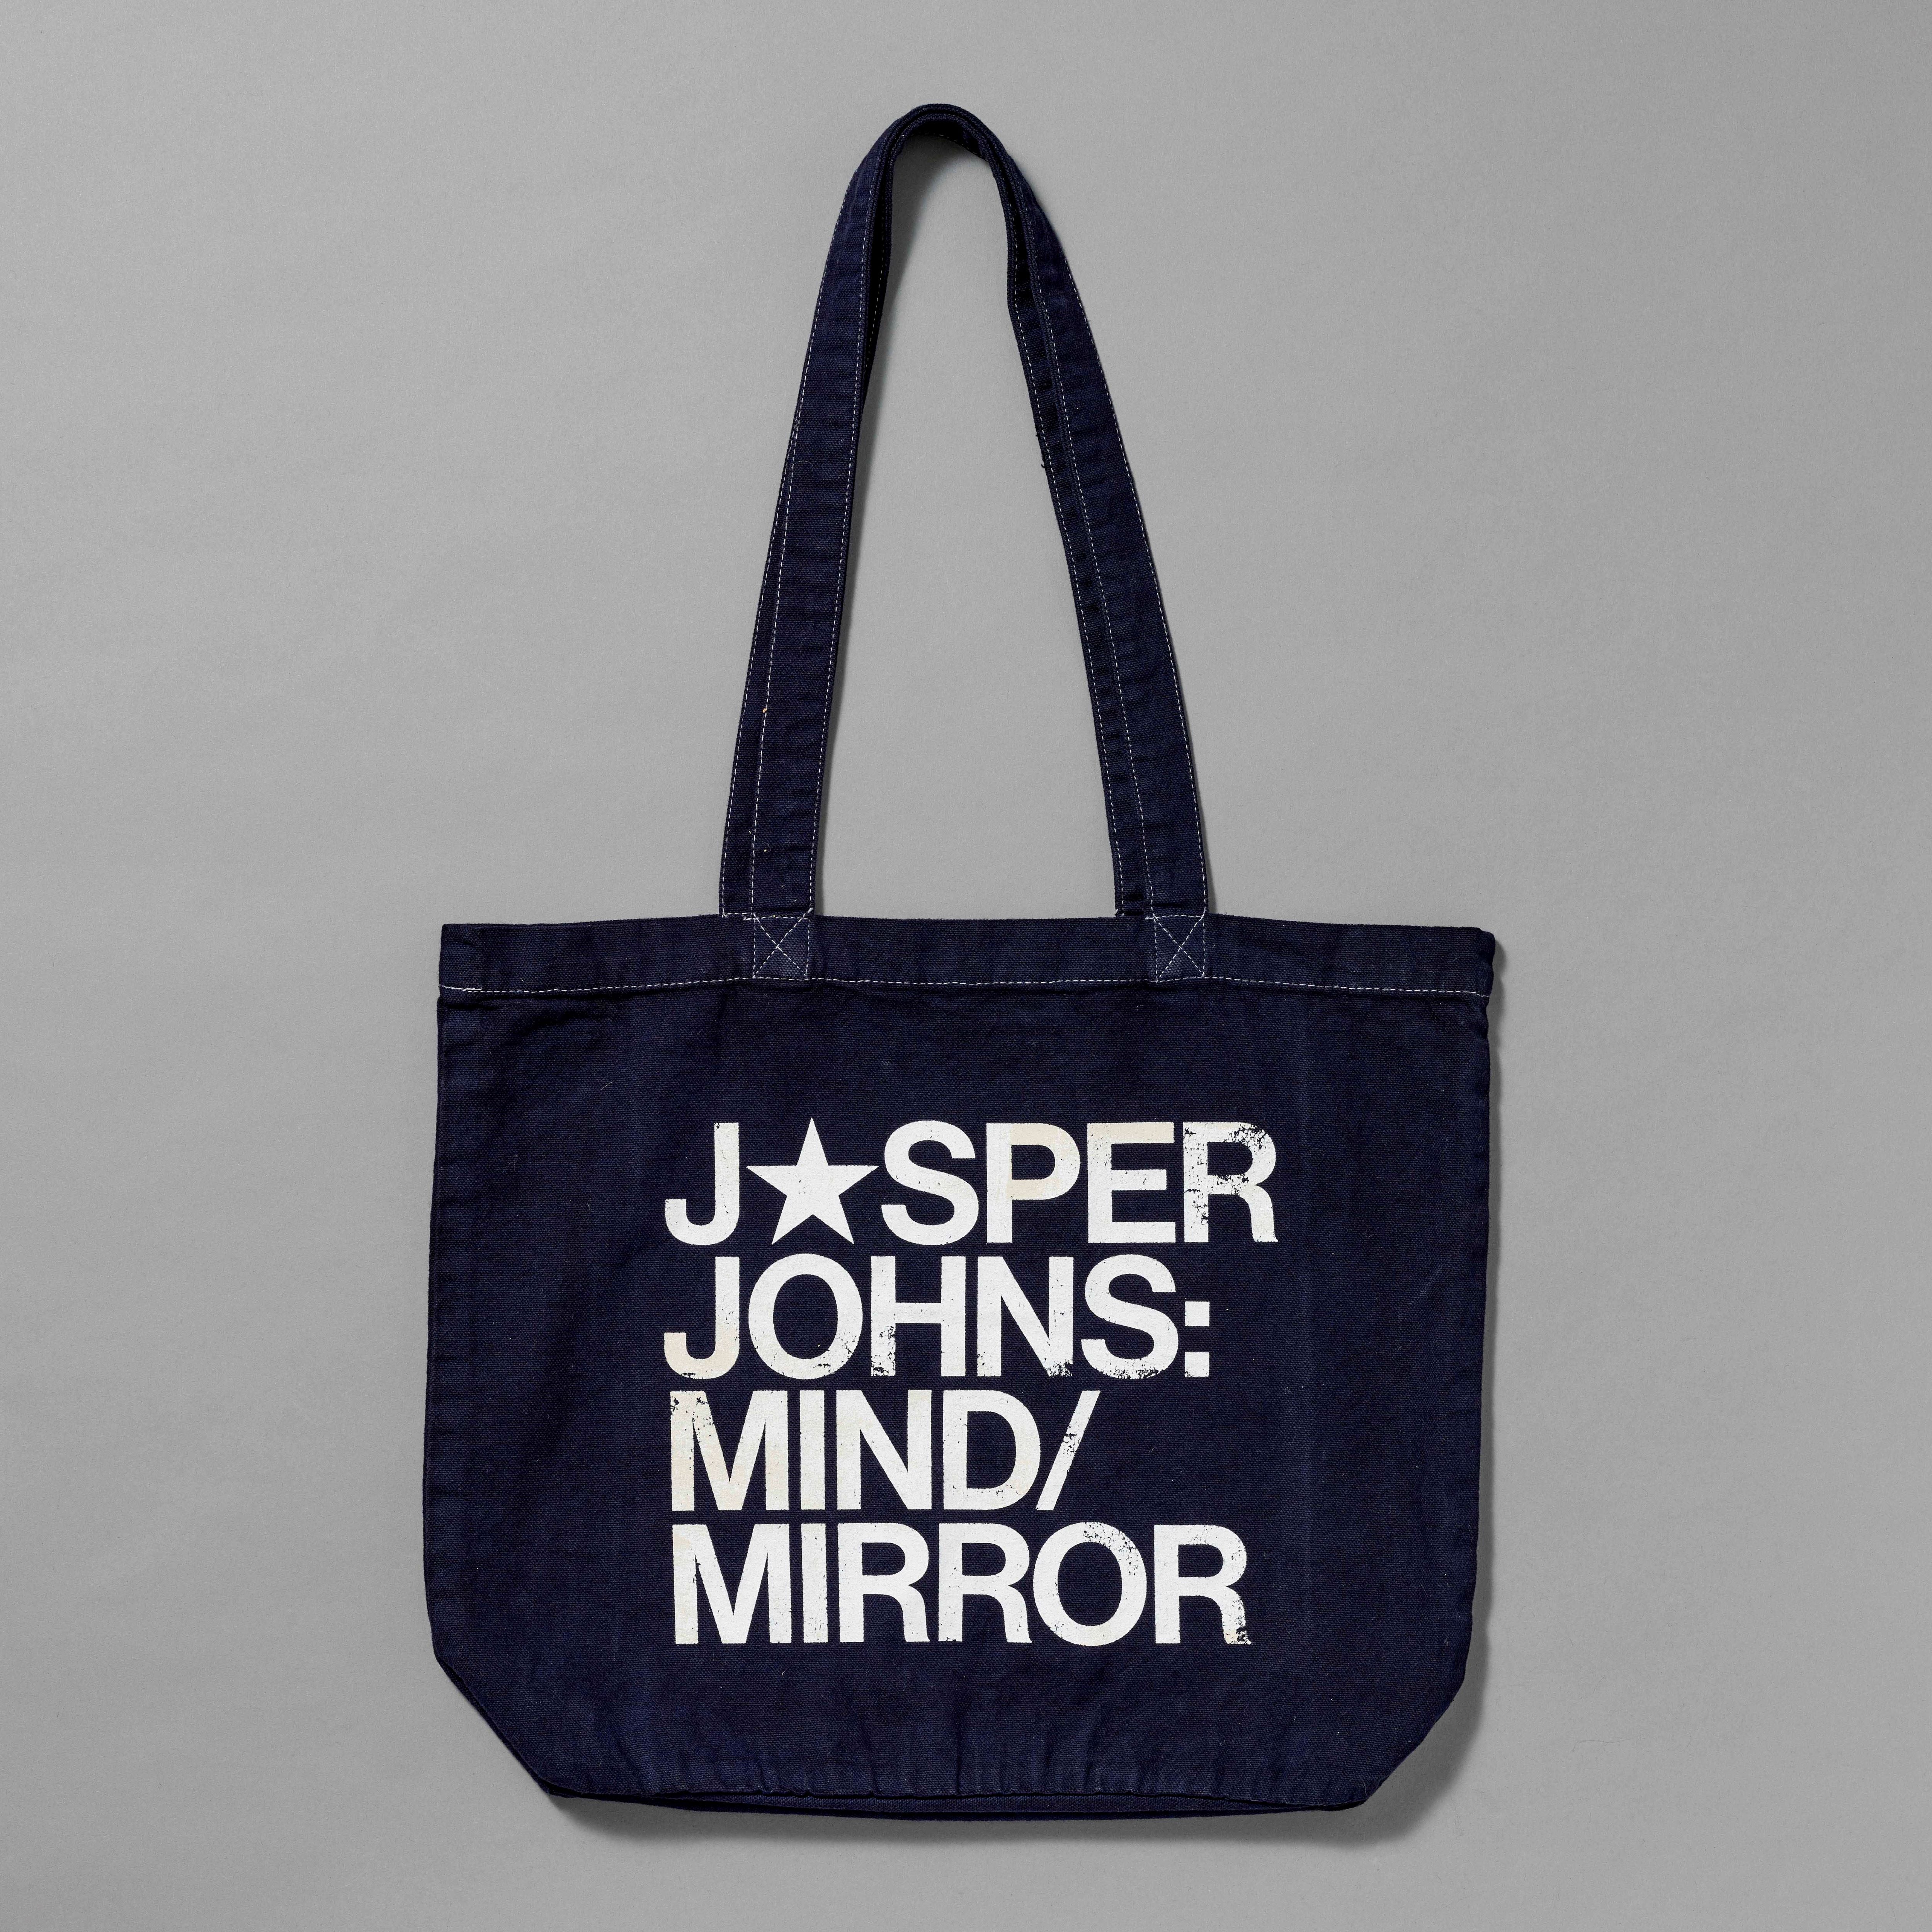 100% Organic Cotton navy tote with Jasper Johns: Mind/Mirror printed in white. Measures 15.5" x 13". 11.5" handles